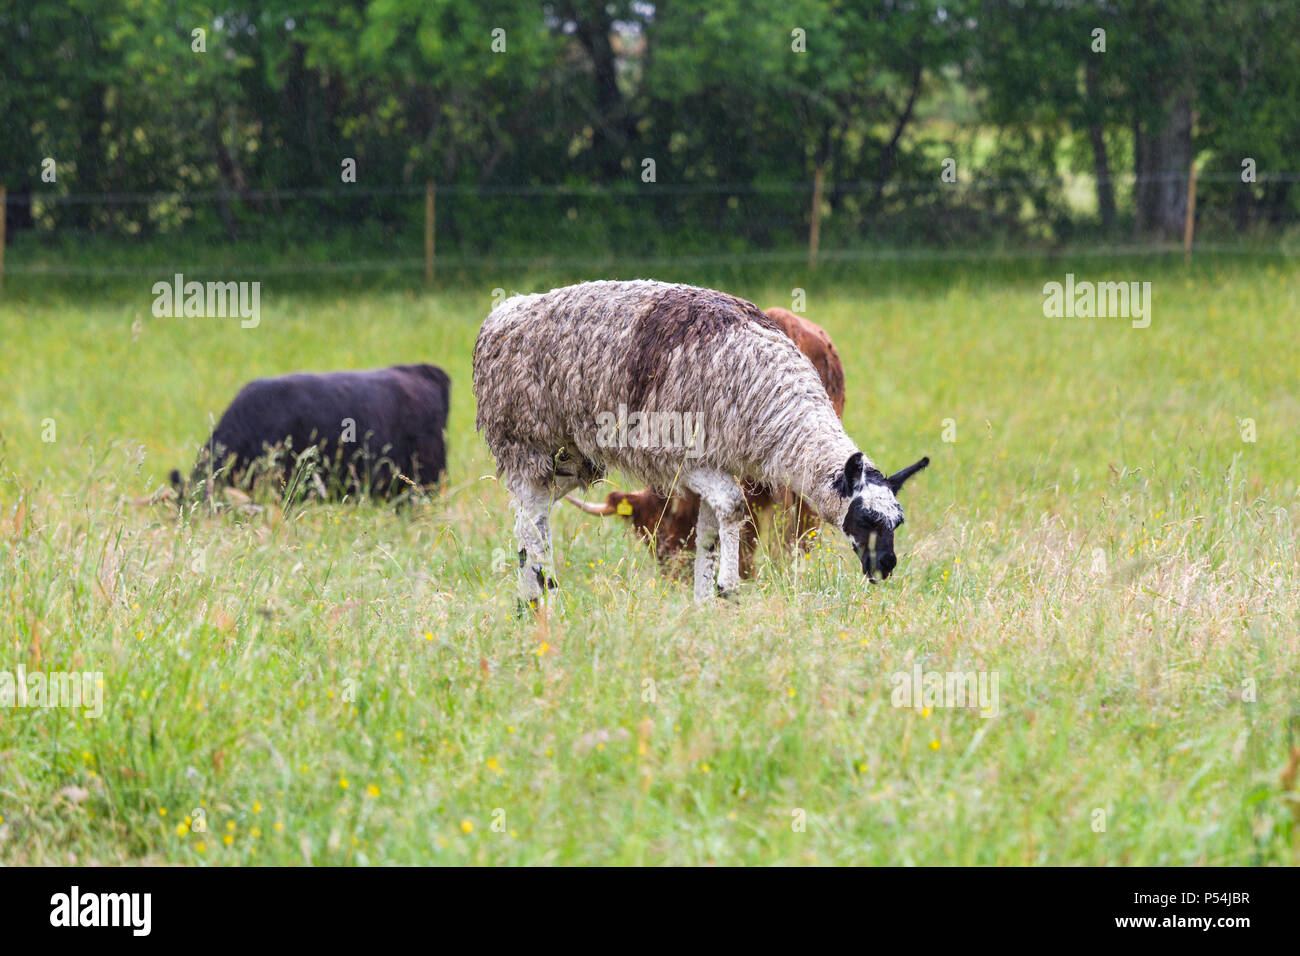 Lama and cows grazing on grass in a field Stock Photo